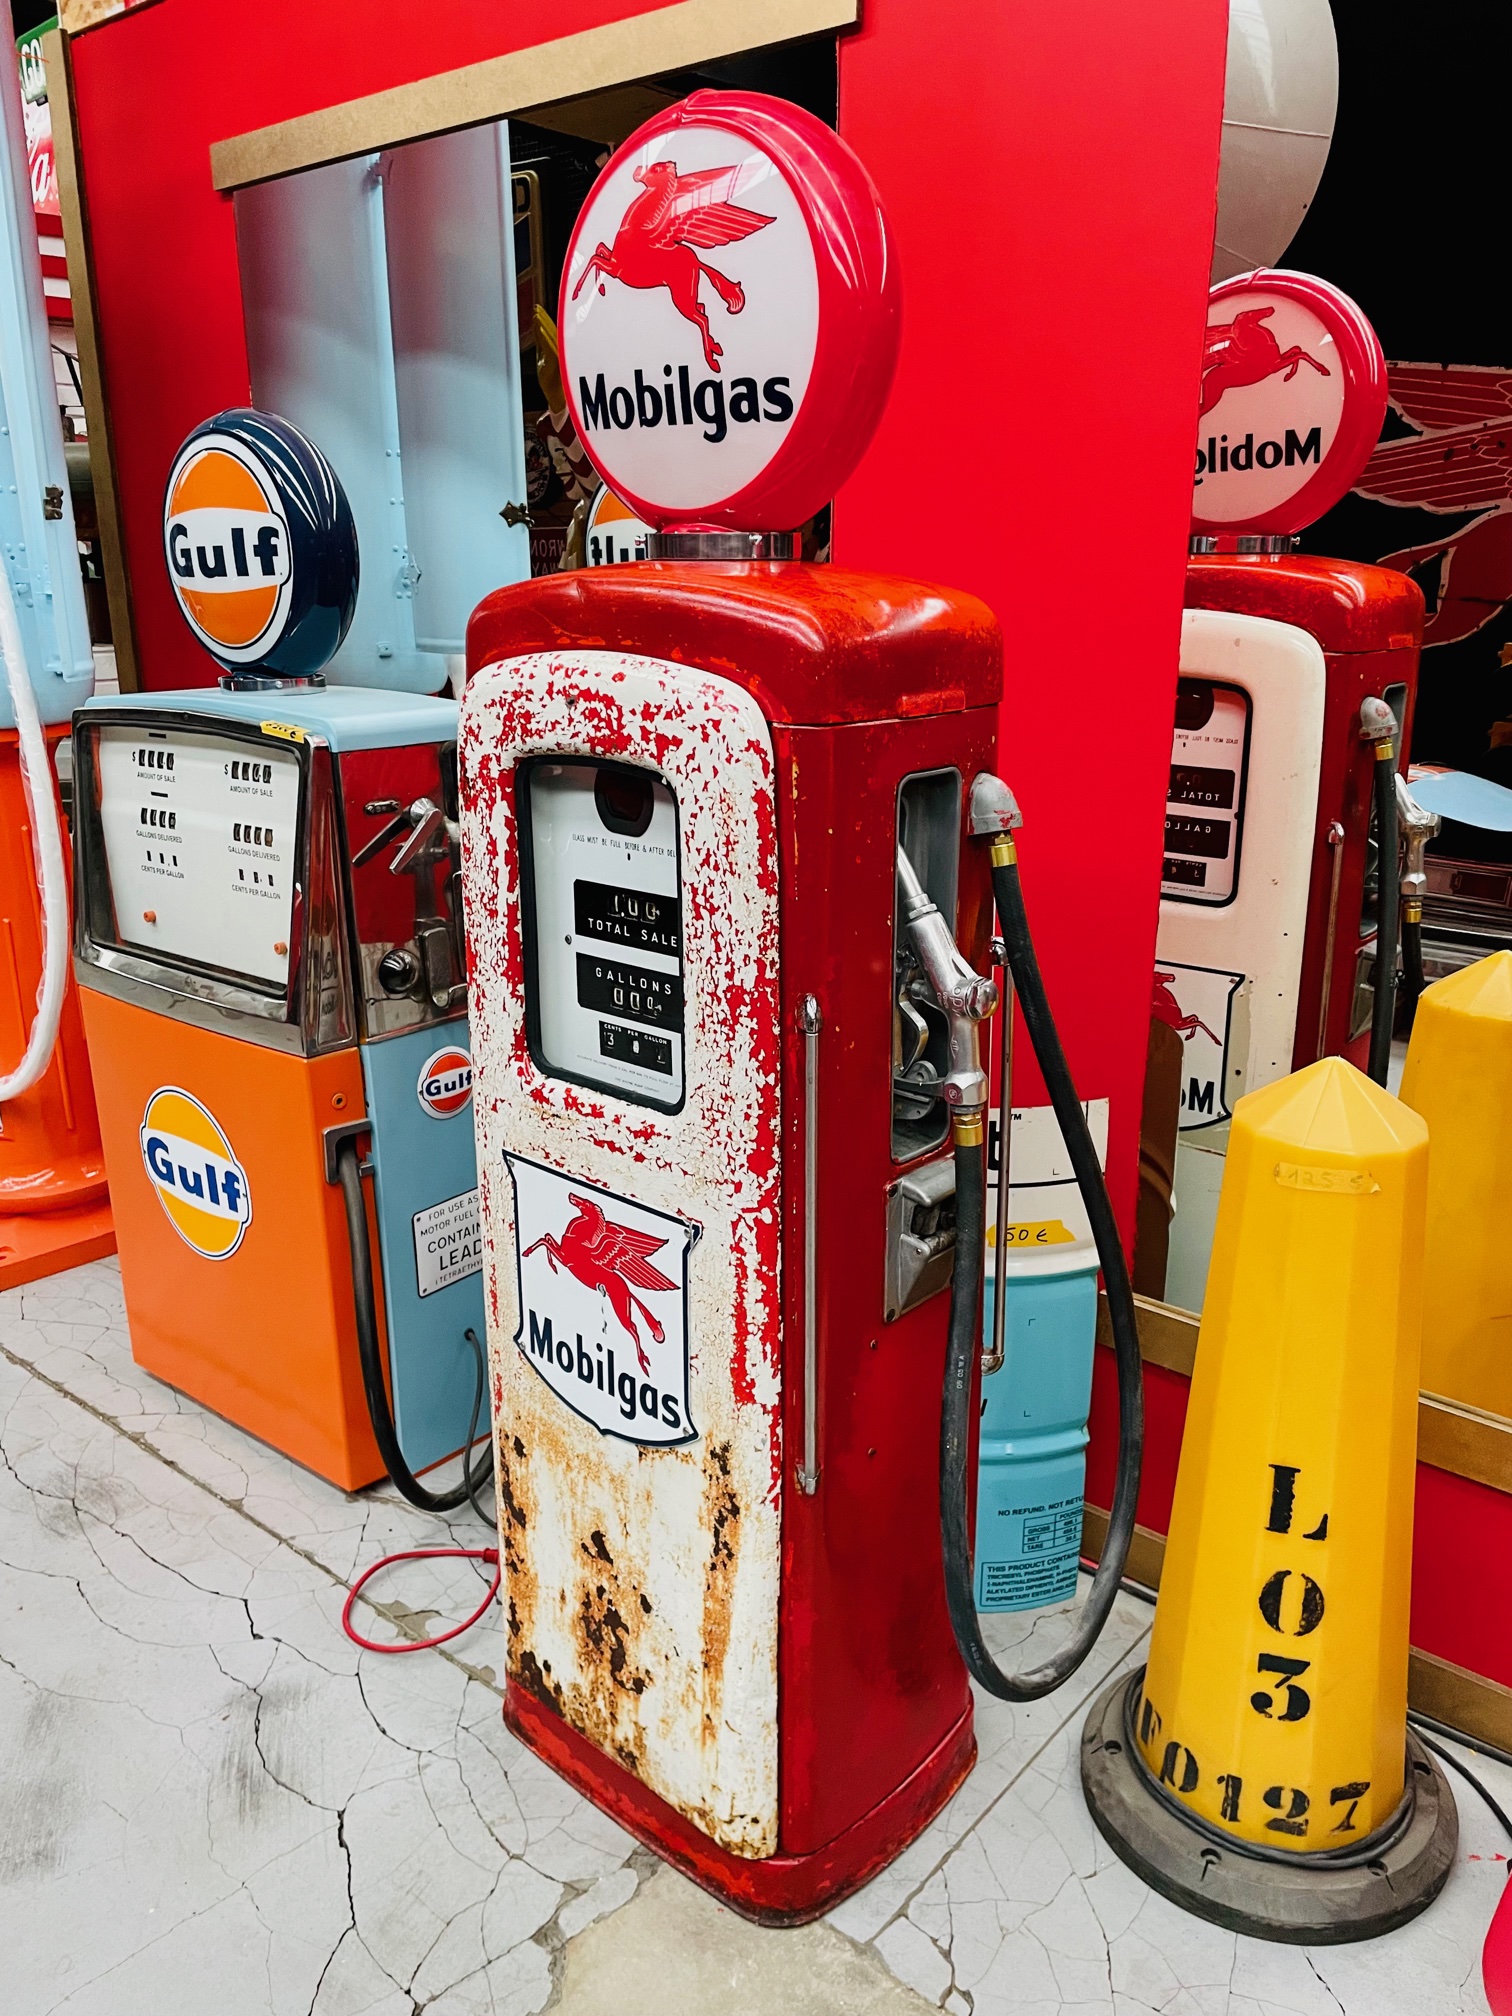 Mobilgas vintage American gas pump from 1954 with its original patina.